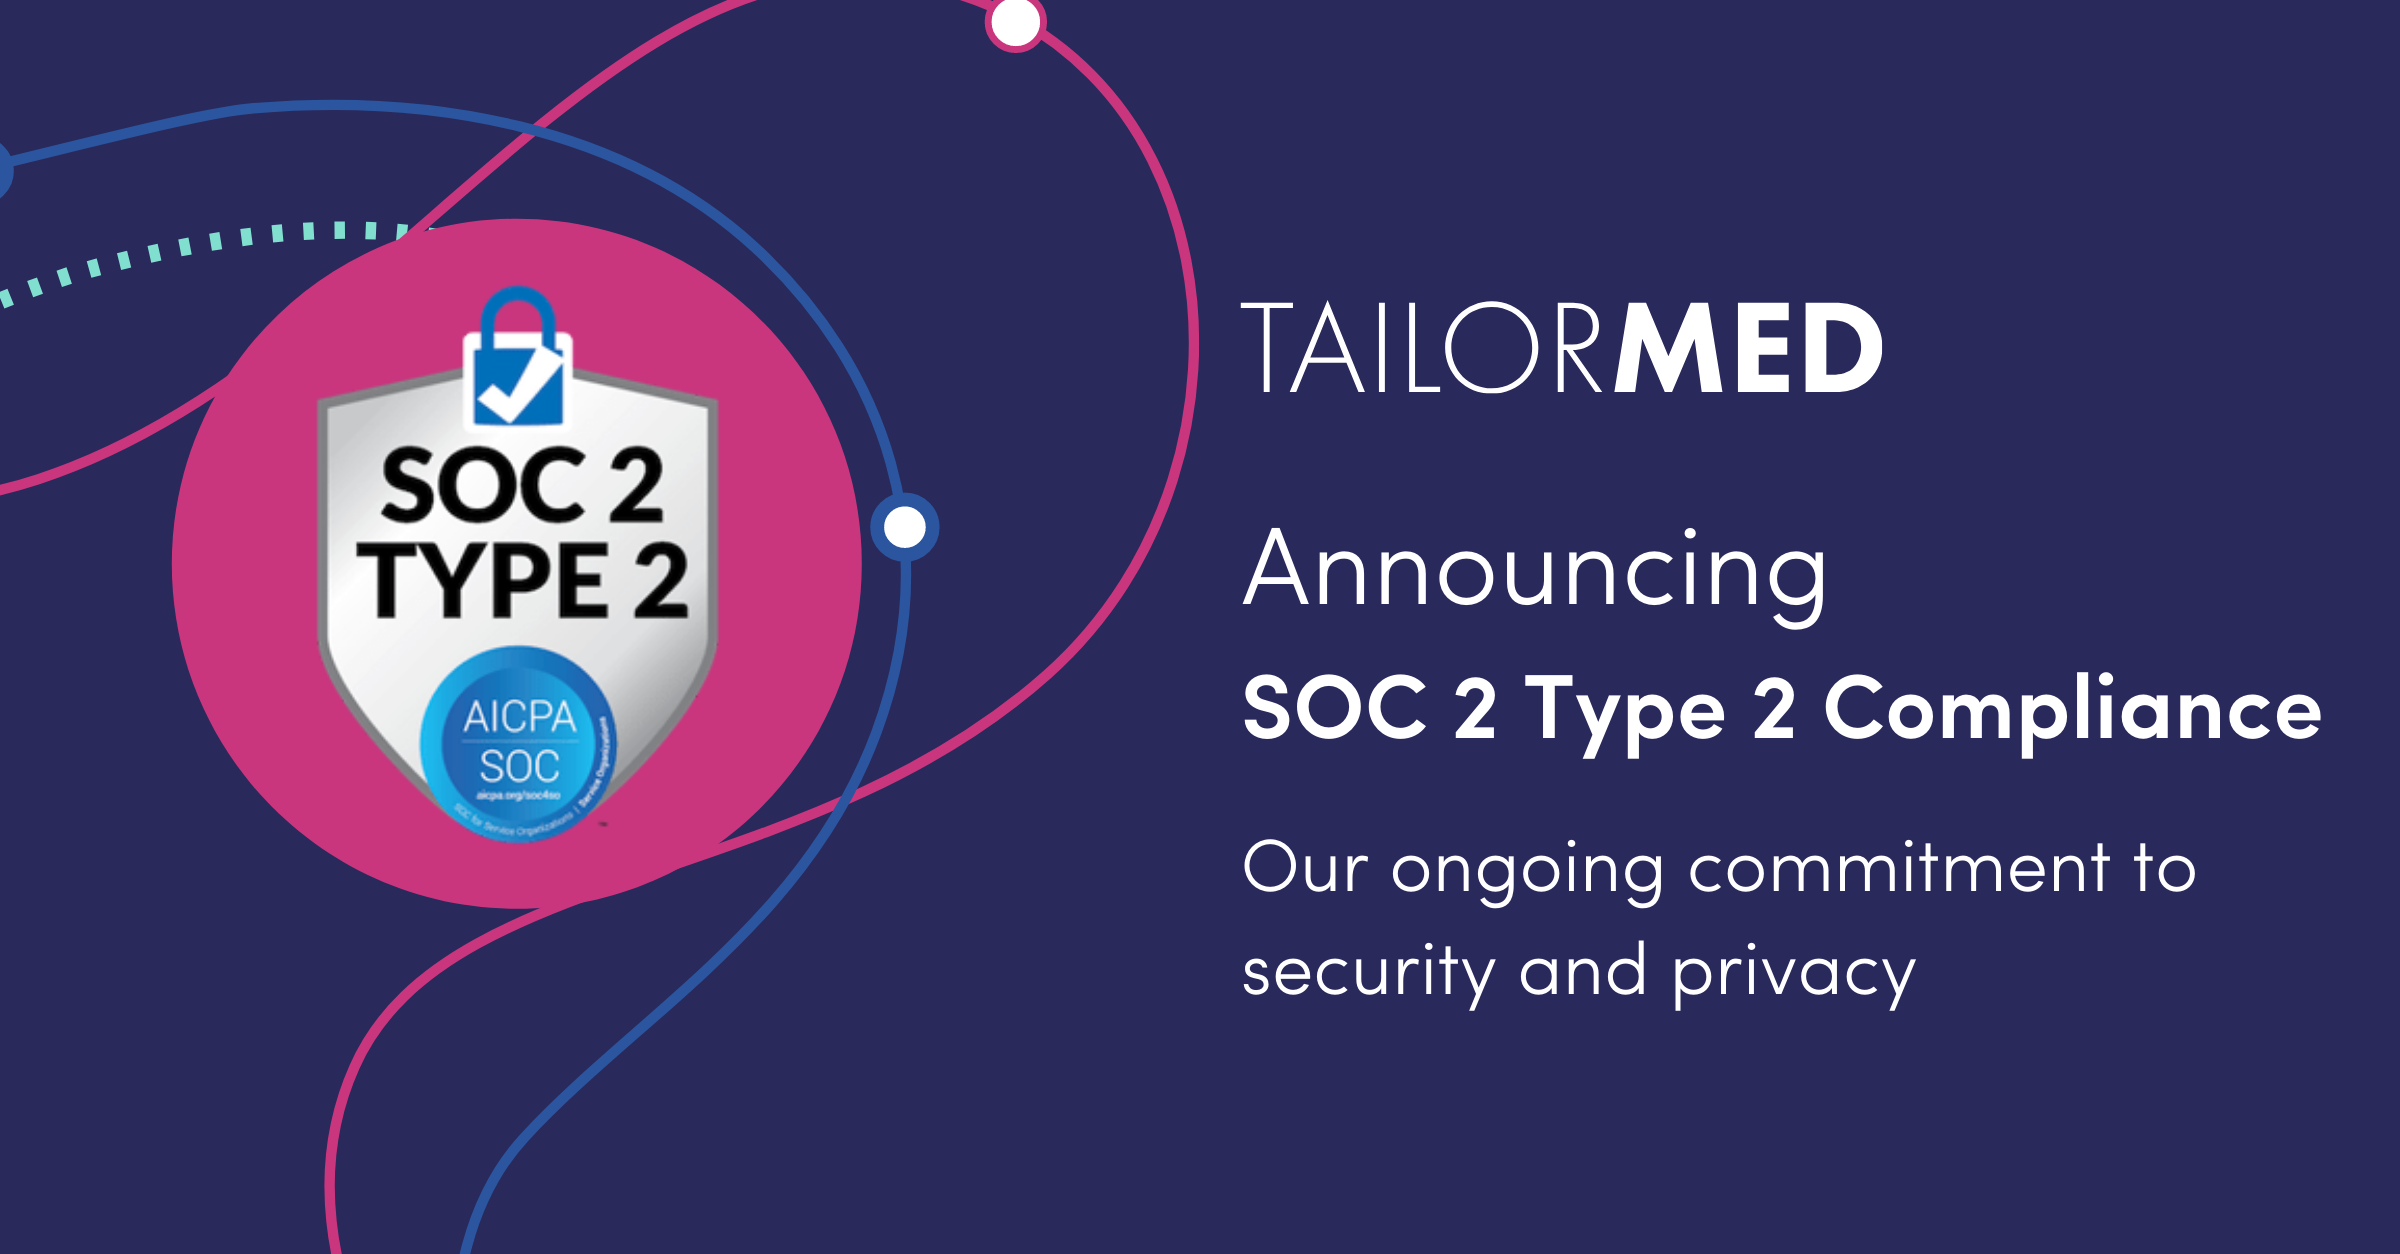 TailorMed announces SOC 2 Type II compliance, reflecting the company's ongoing commitment to security and privacy.